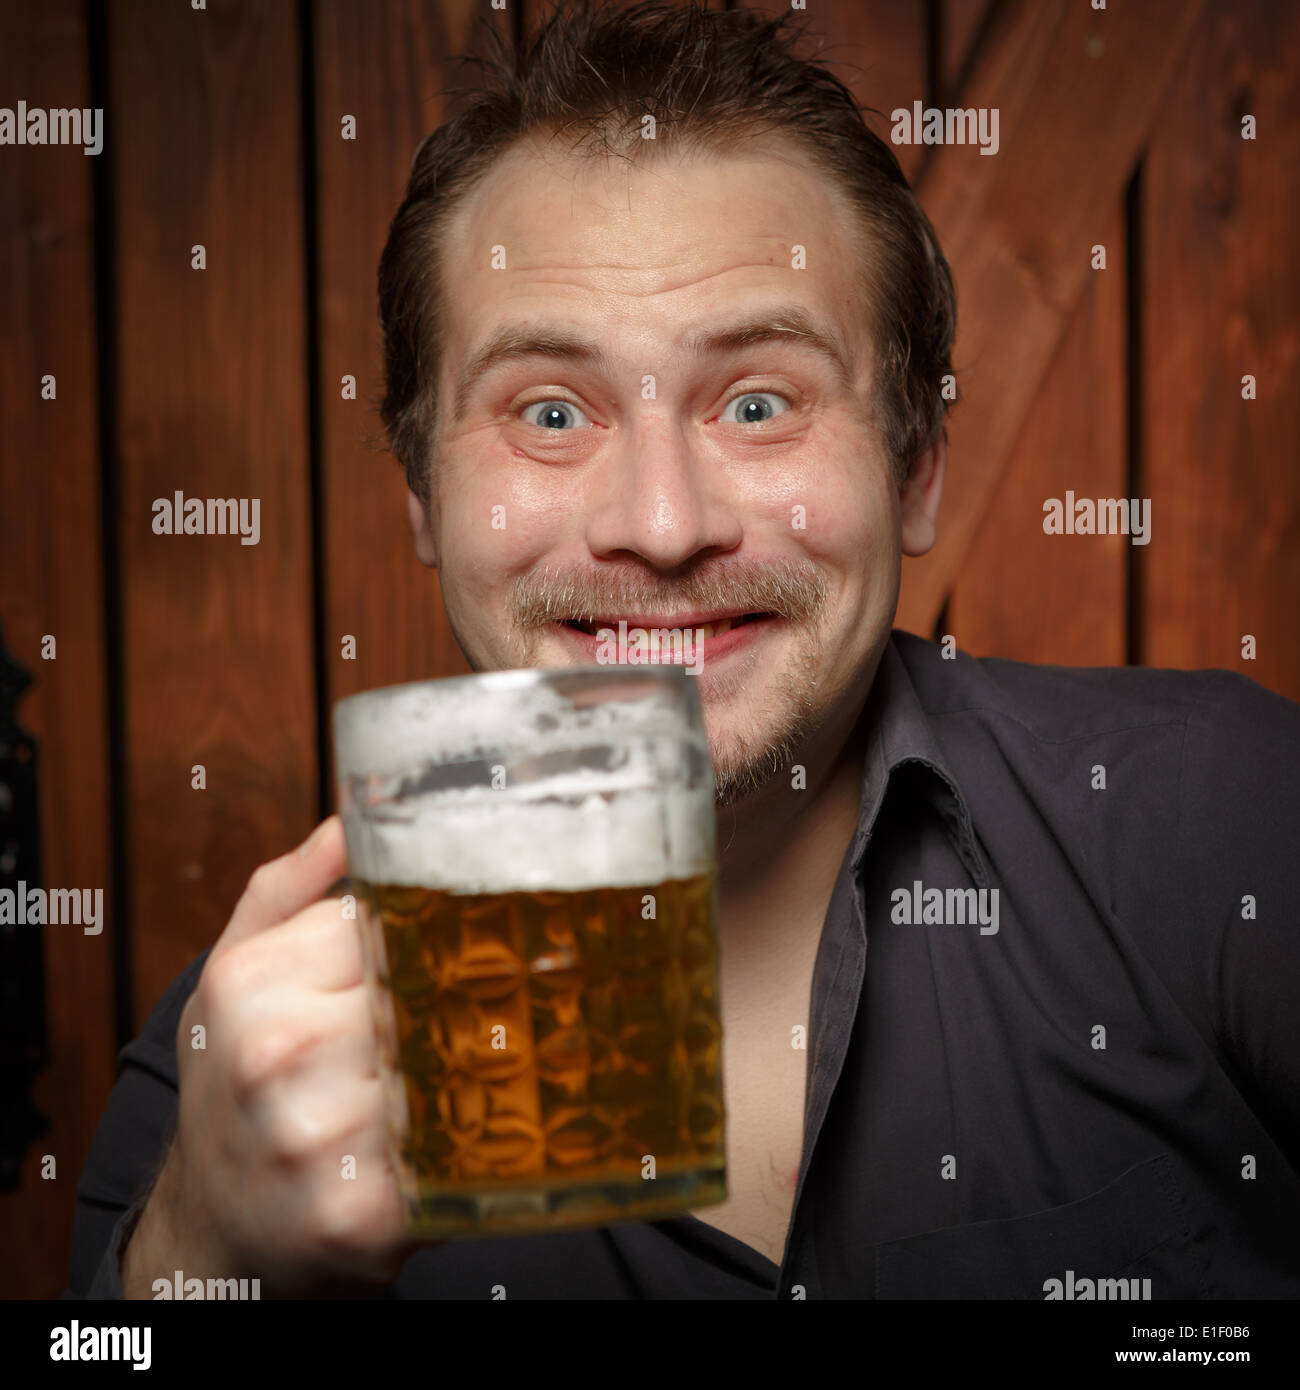 Happy man drinking beer from the mug. Stock Photo